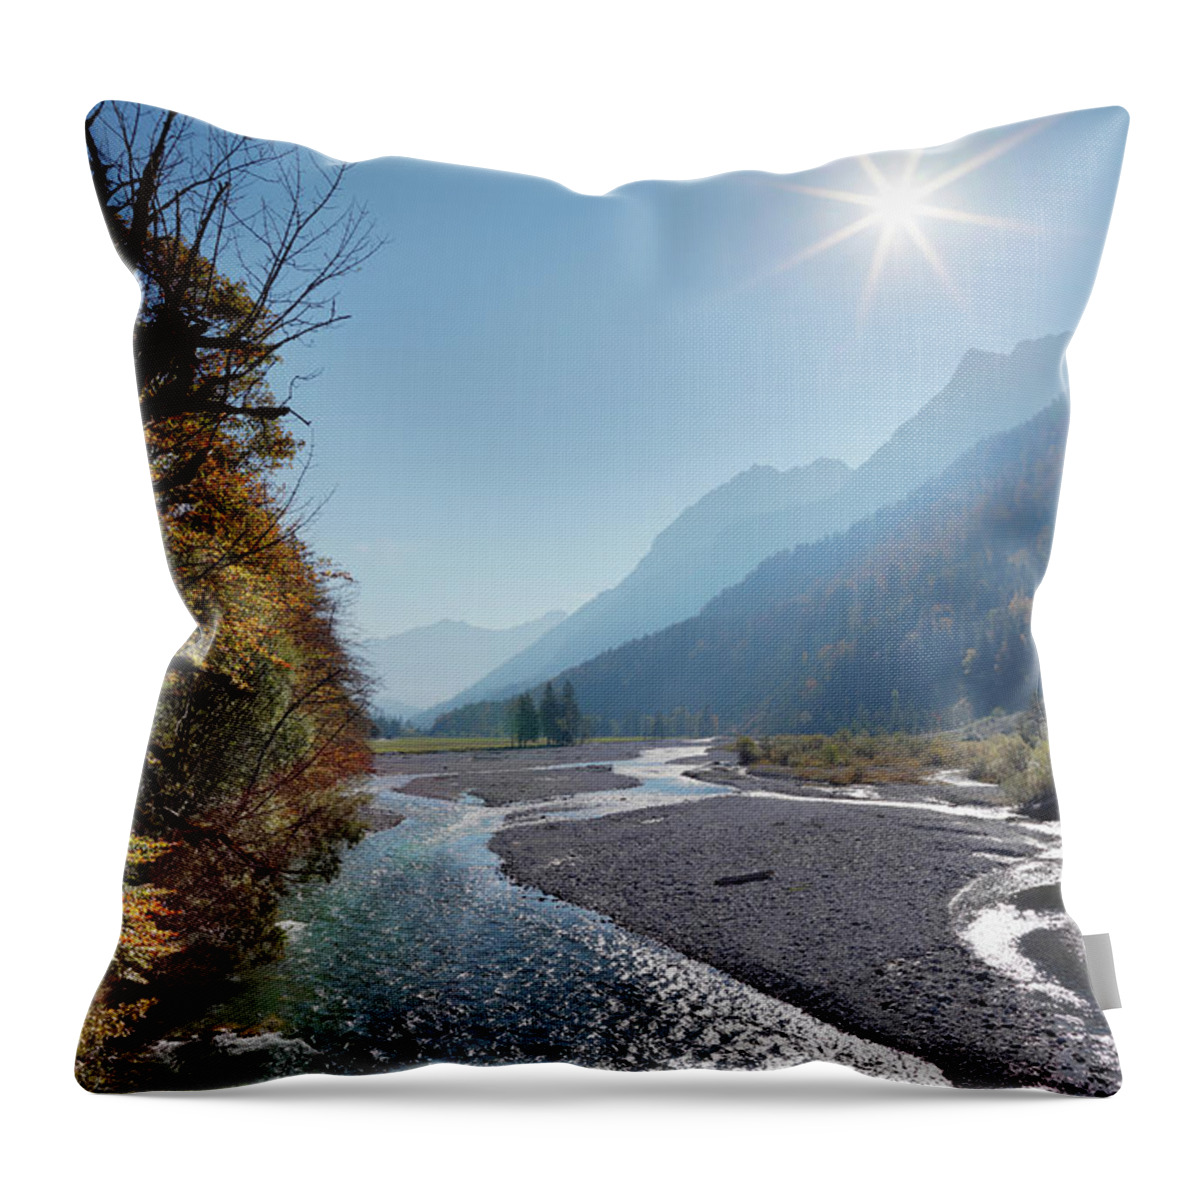 Clear Sky Throw Pillow featuring the photograph Austria, Tyrol, View Of Karwendel by Westend61